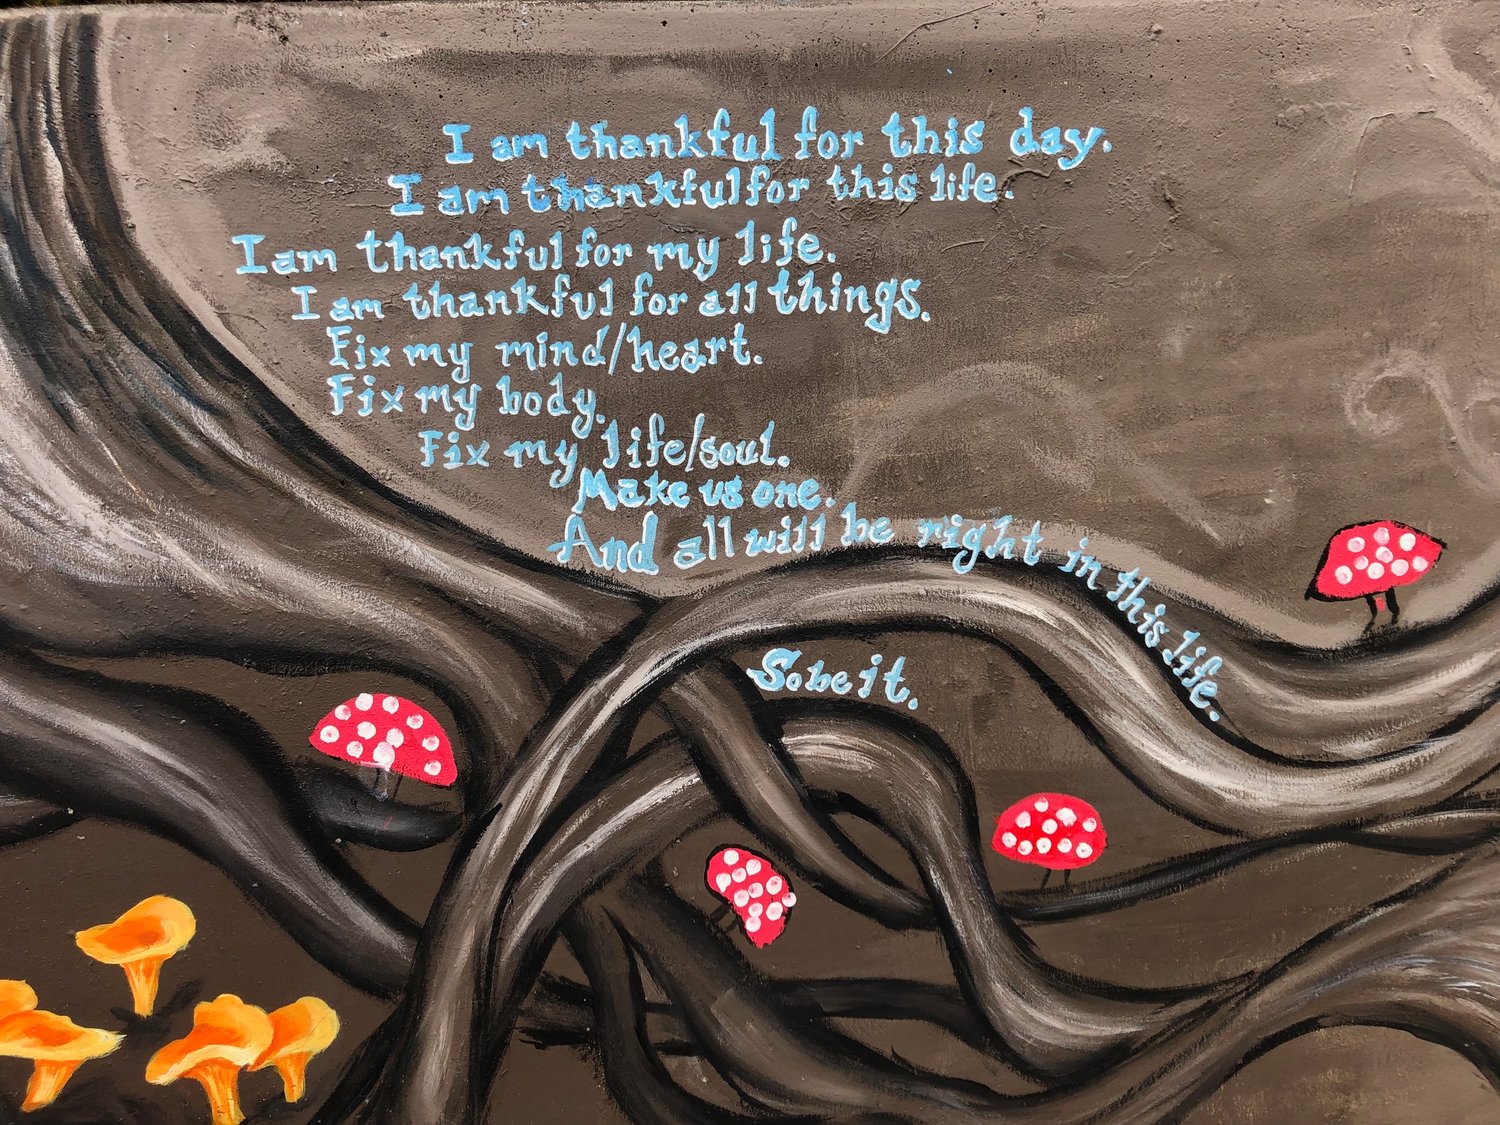 This is the English translation of the Native American prayer is painted on the Climate Justice Wall in west Olympia. See original translation in the next photo.